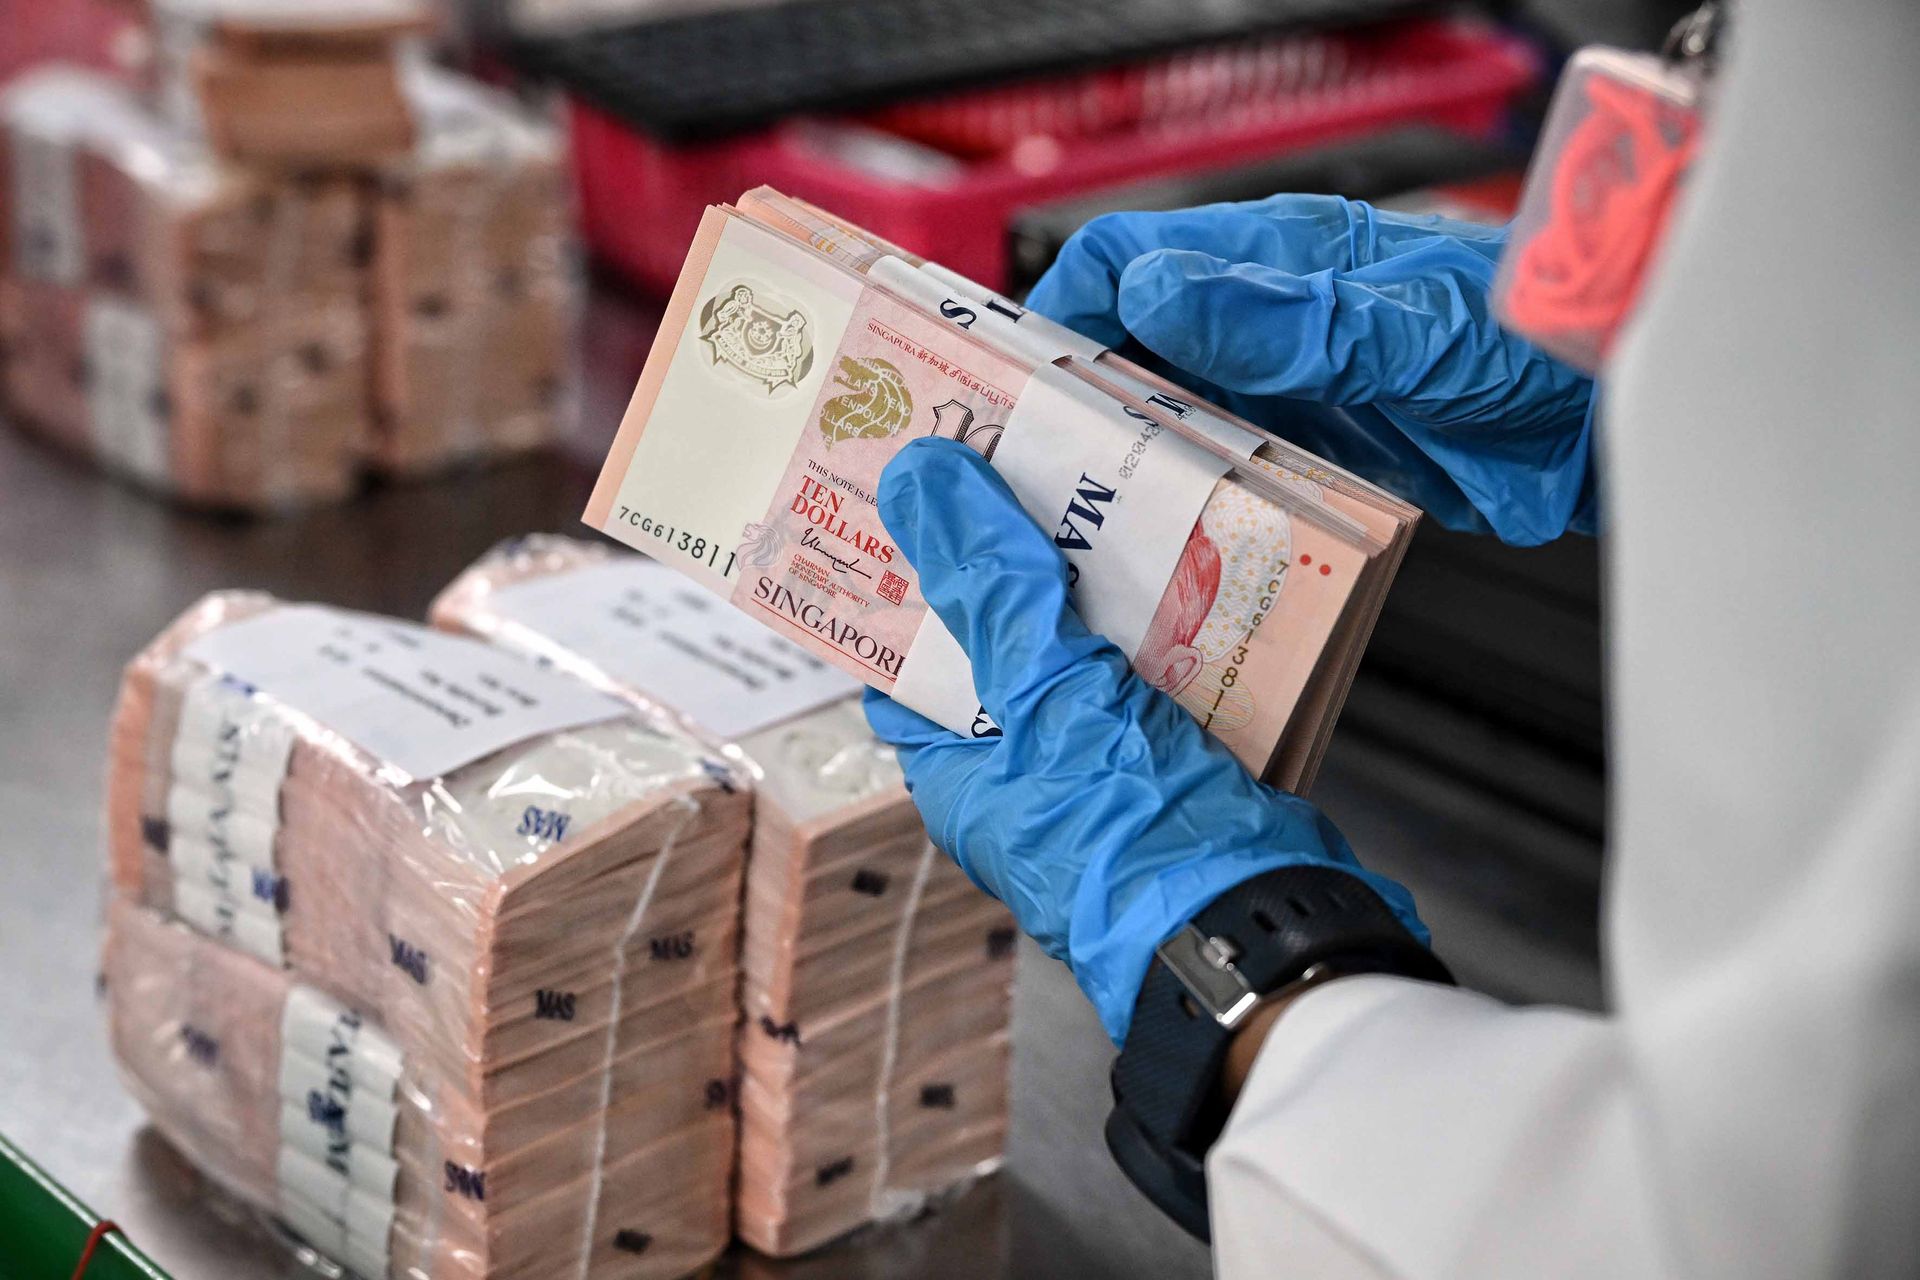 New notes from MAS arrive at Certis’ cash processing centre, where cash management officers make sure the sealed boxes have not been not tampered with.